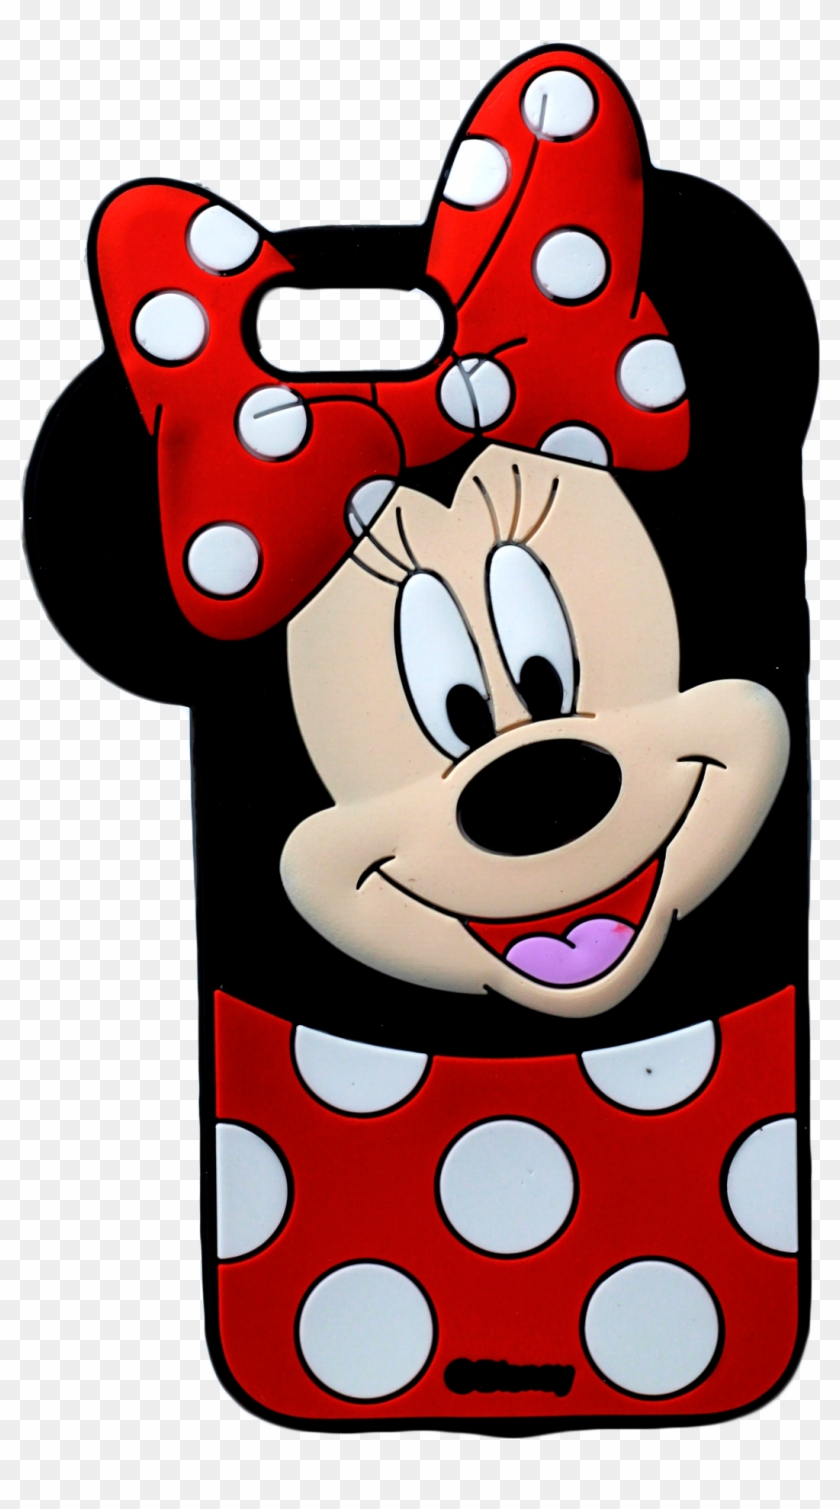 Apple Iphone 7 Plus Iphone 5 Apple Iphone 8 Plus Minnie - Phone Cover Mickey Mouse Clipart